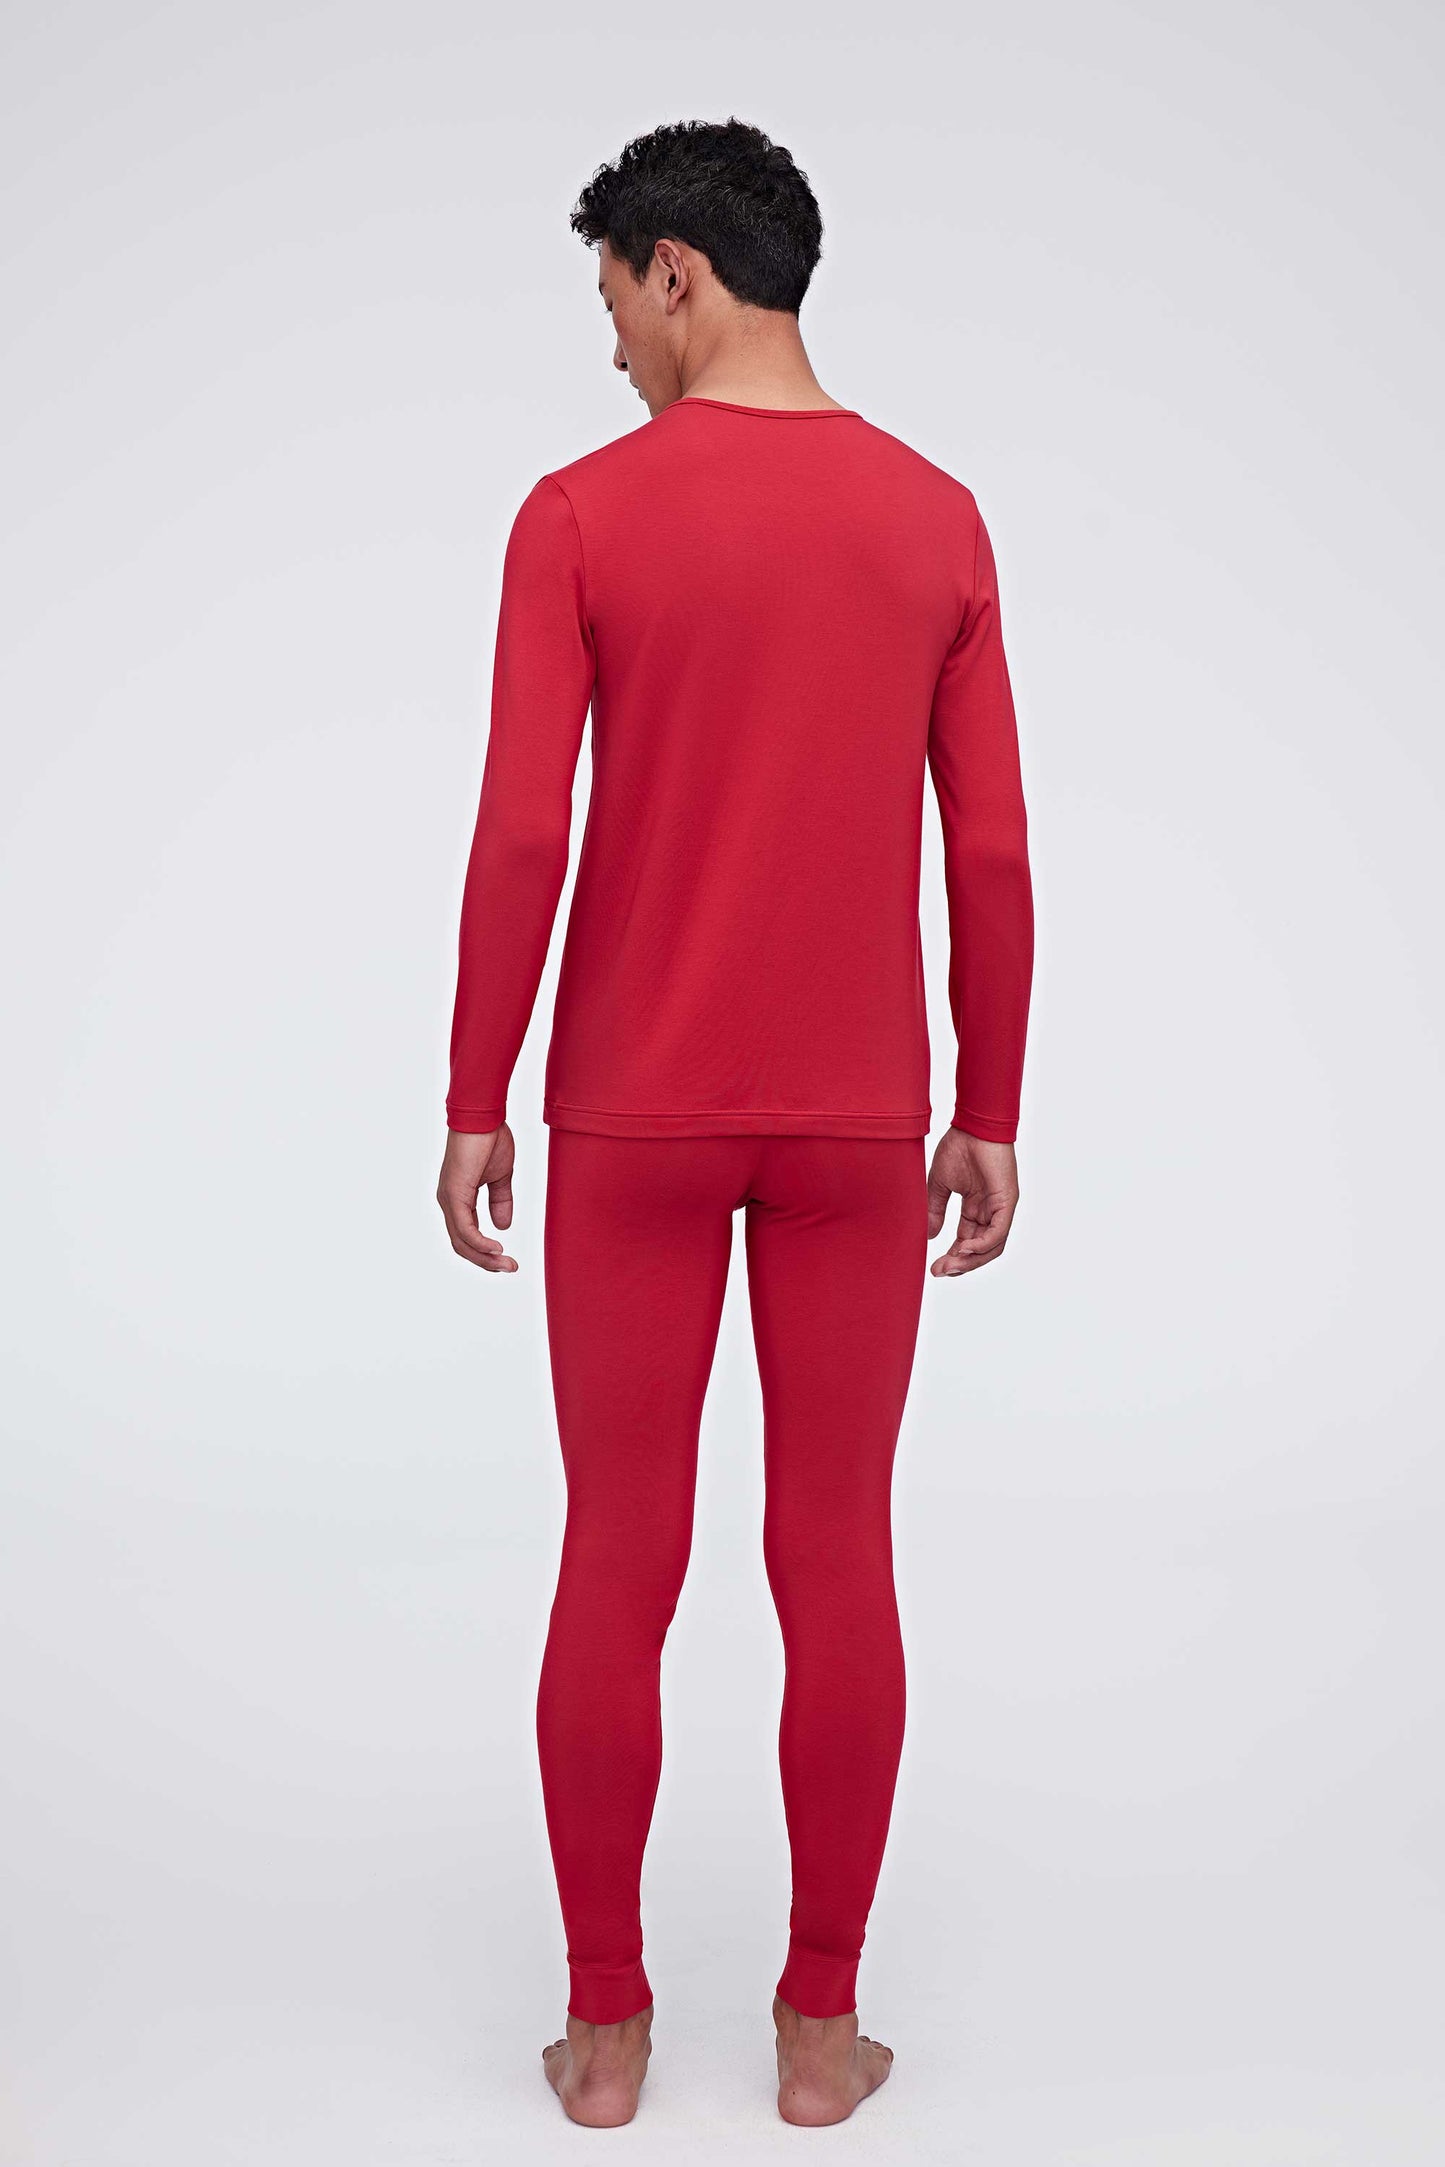 The back of the red thermal set